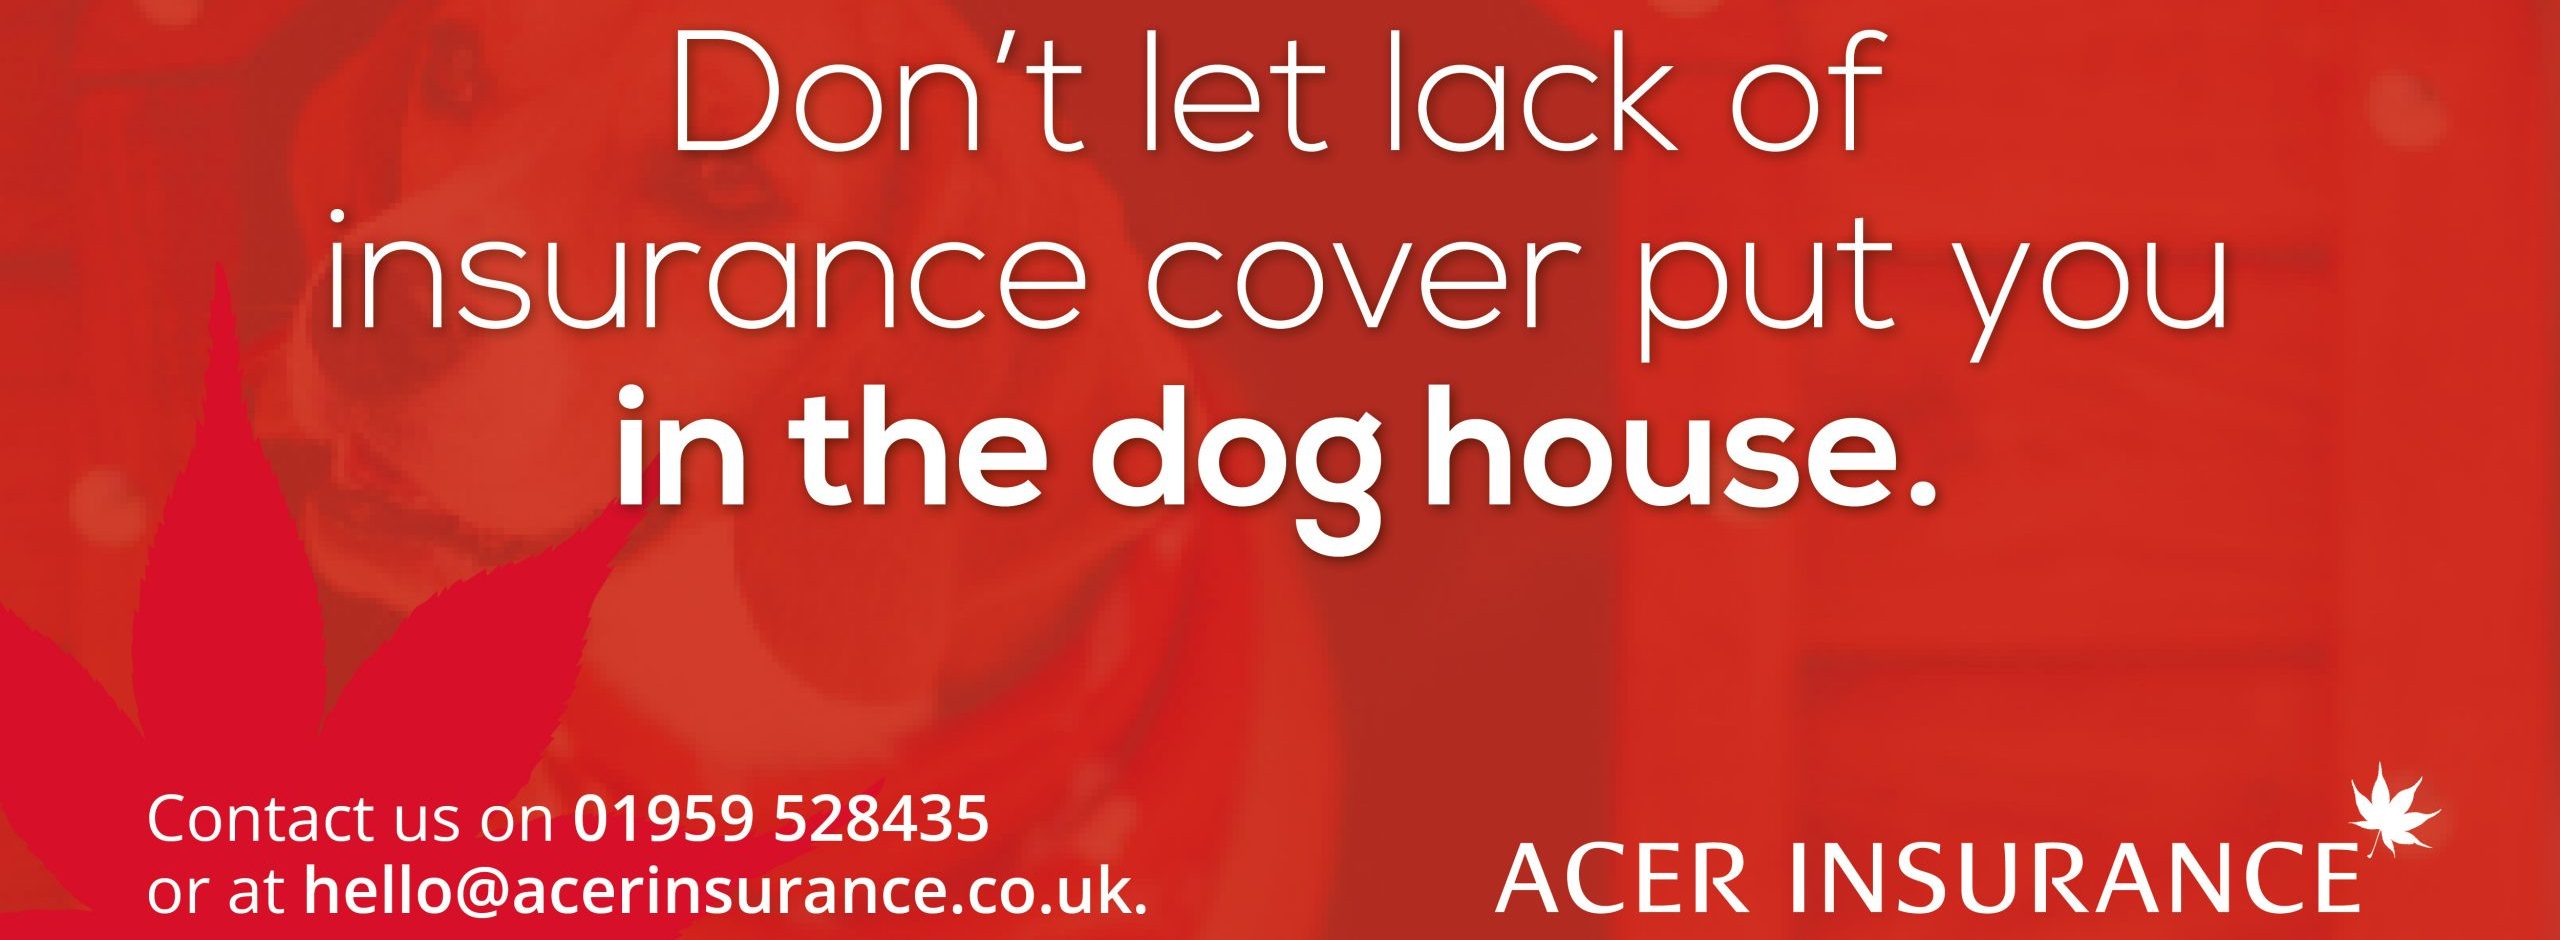 Don't let lack of insurance cover put you in the dog house